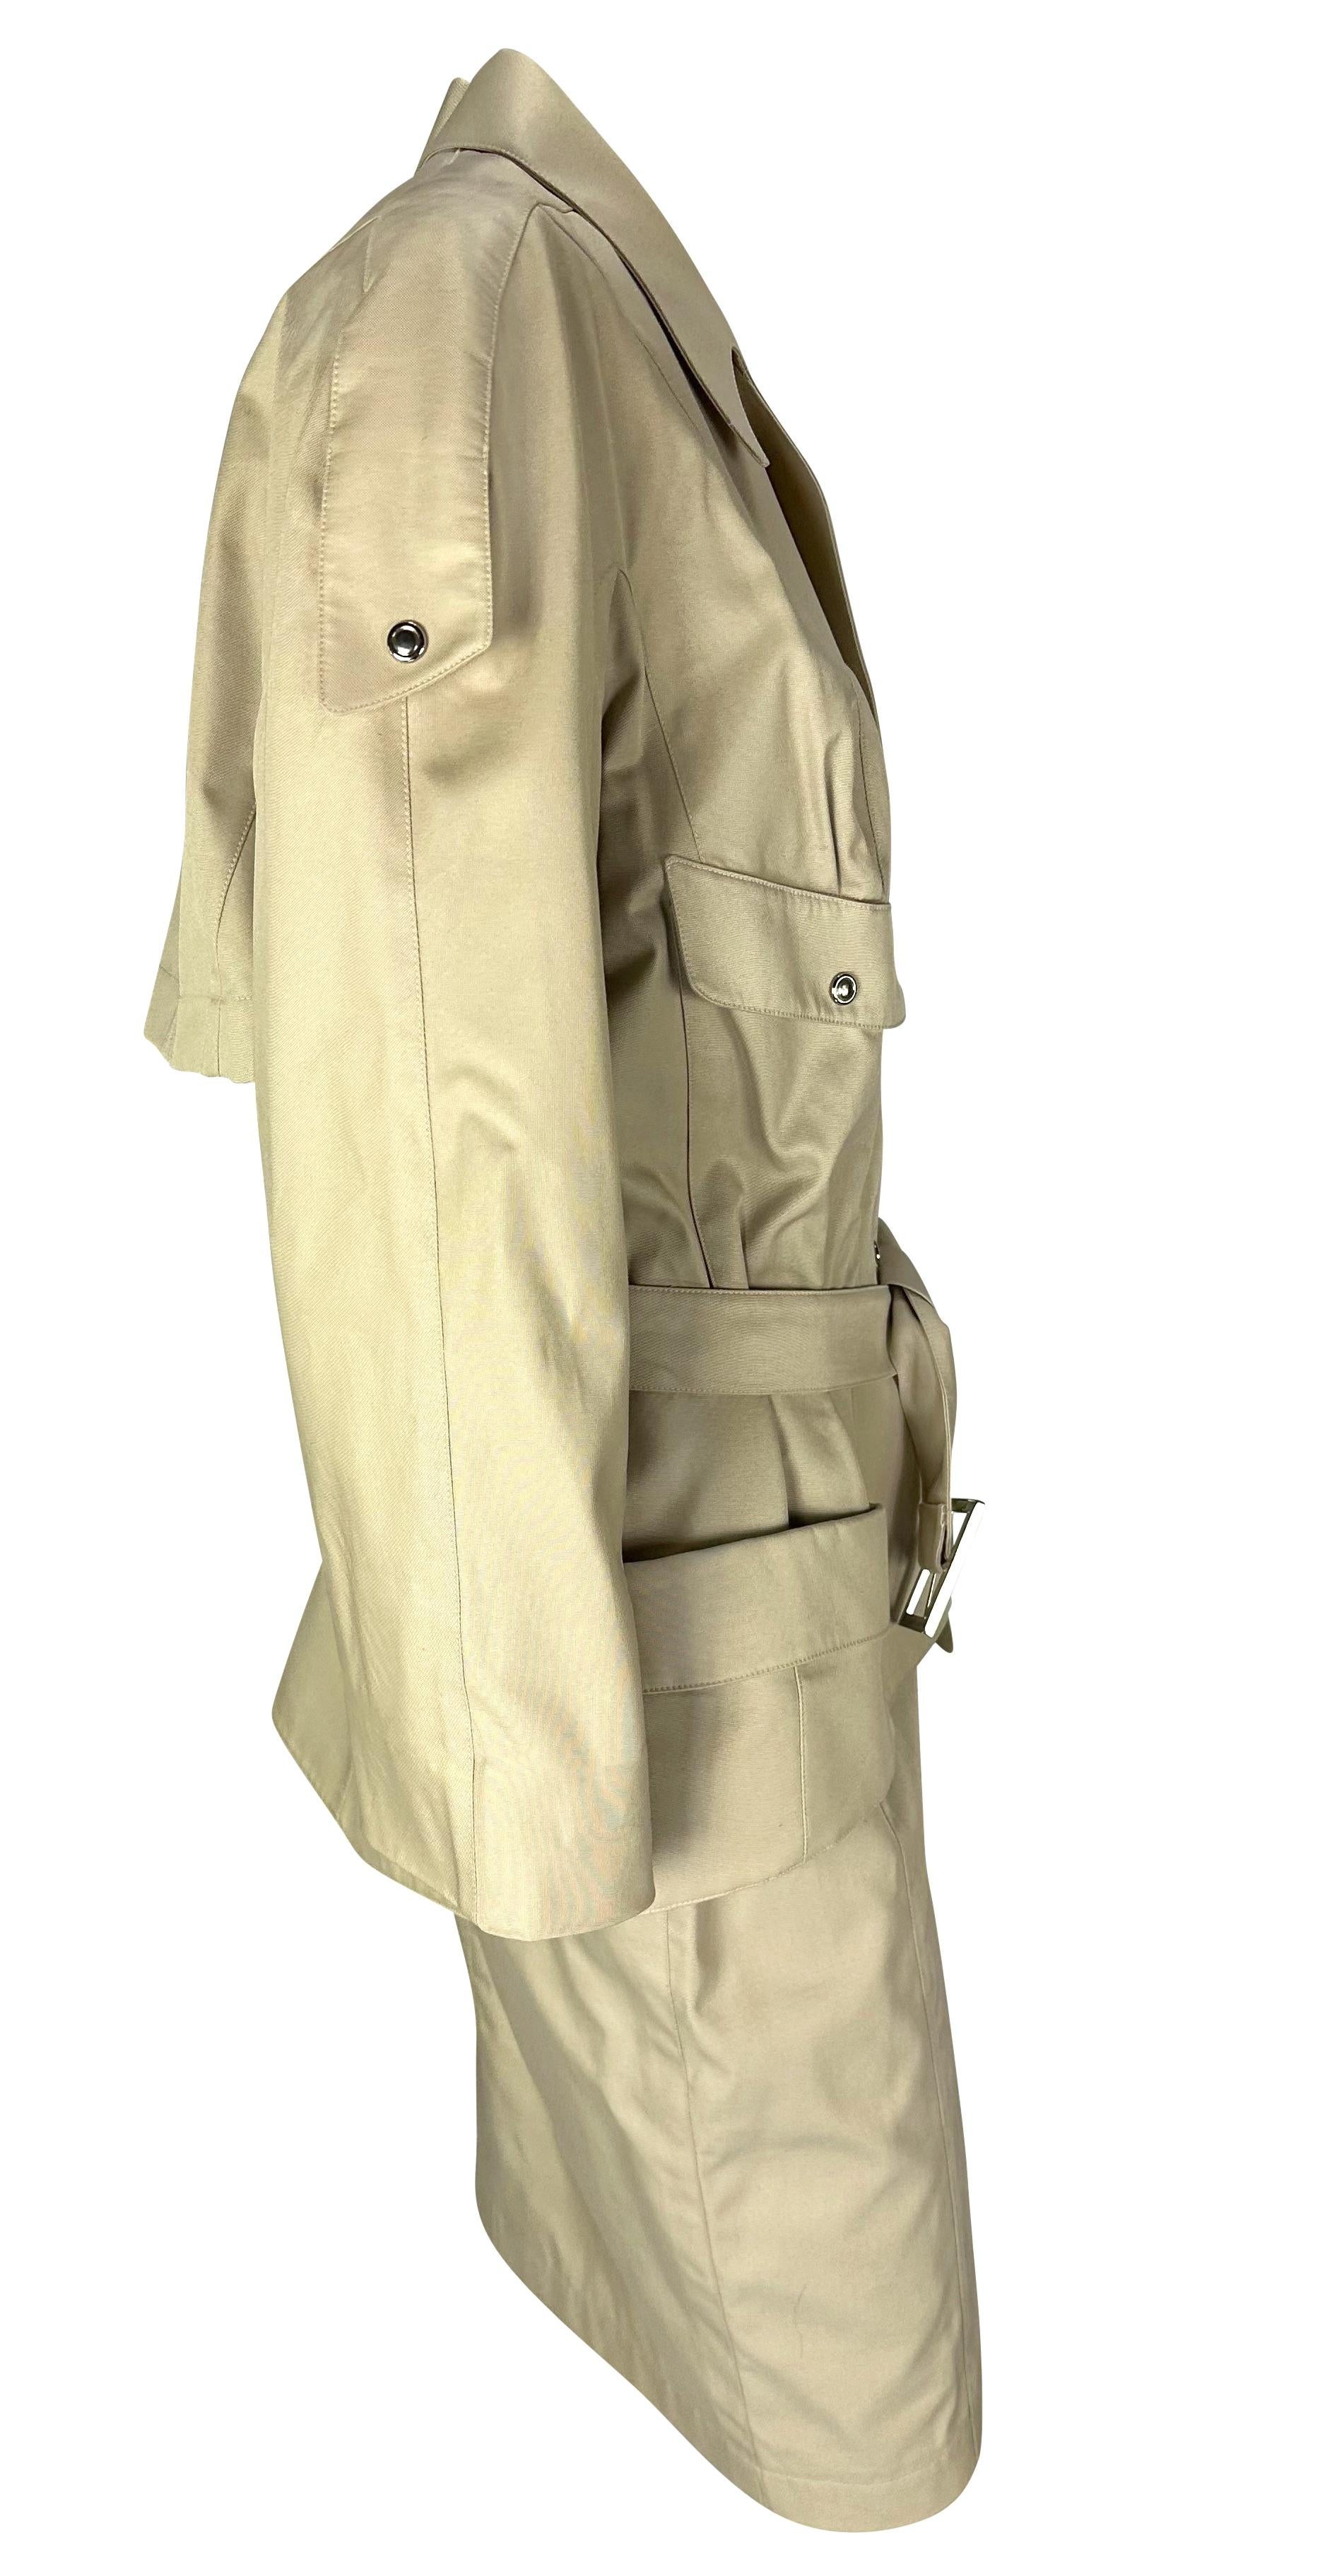 S/S 1996 Thierry Mugler Runway Khaki Cinched Belted Skirt Suit For Sale 1